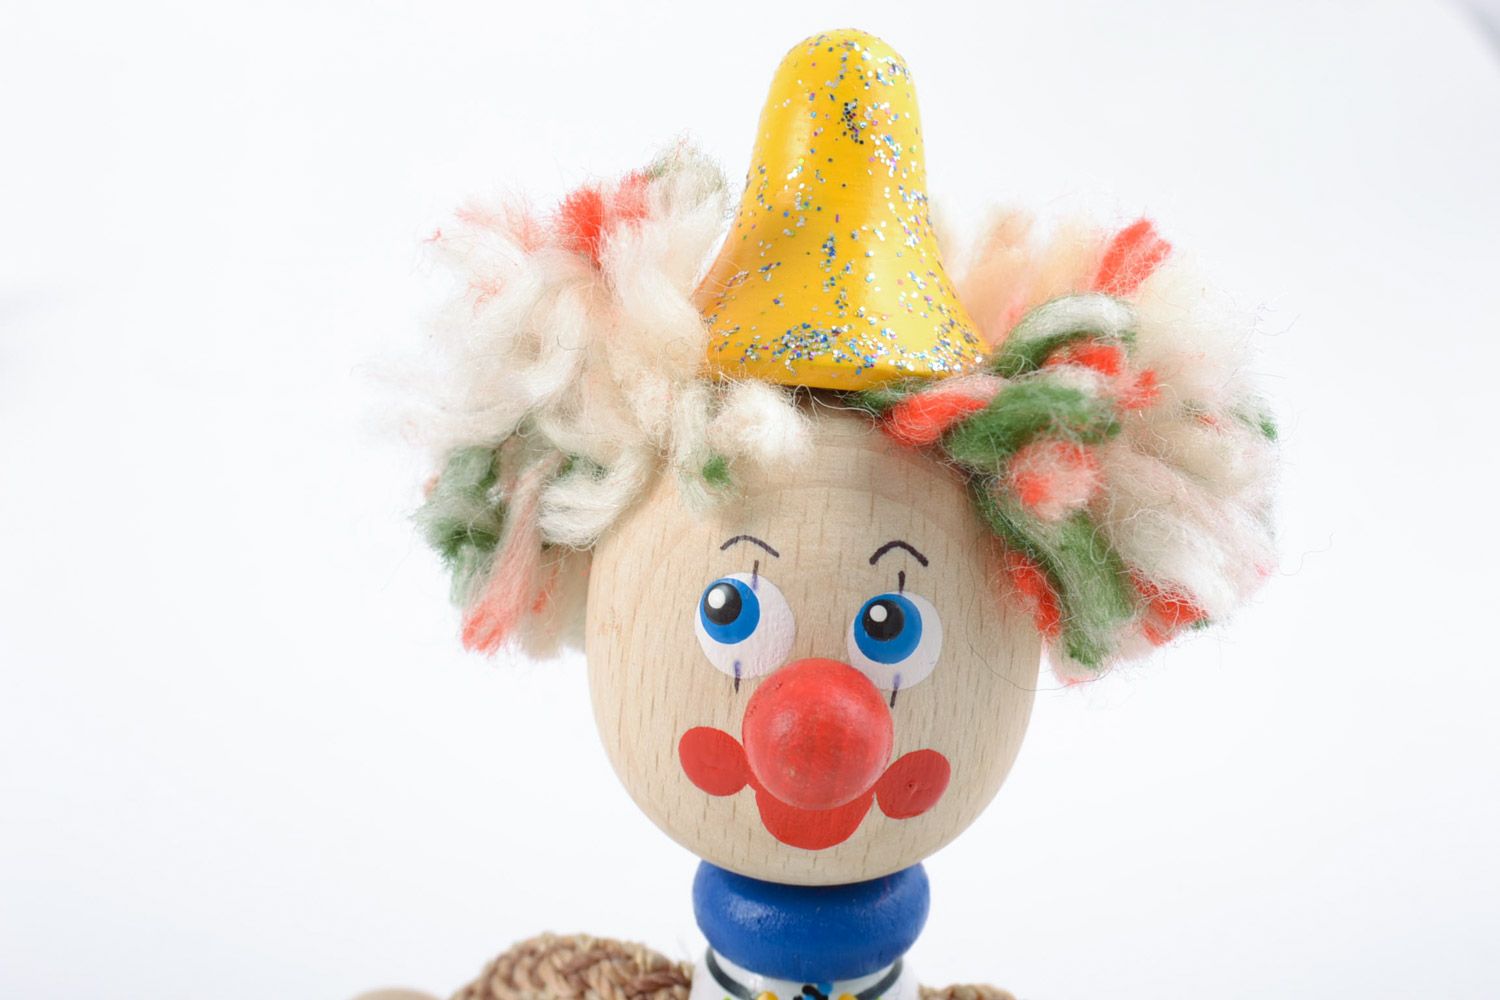 Bright homemade painted wooden toy in the shape of clown photo 3